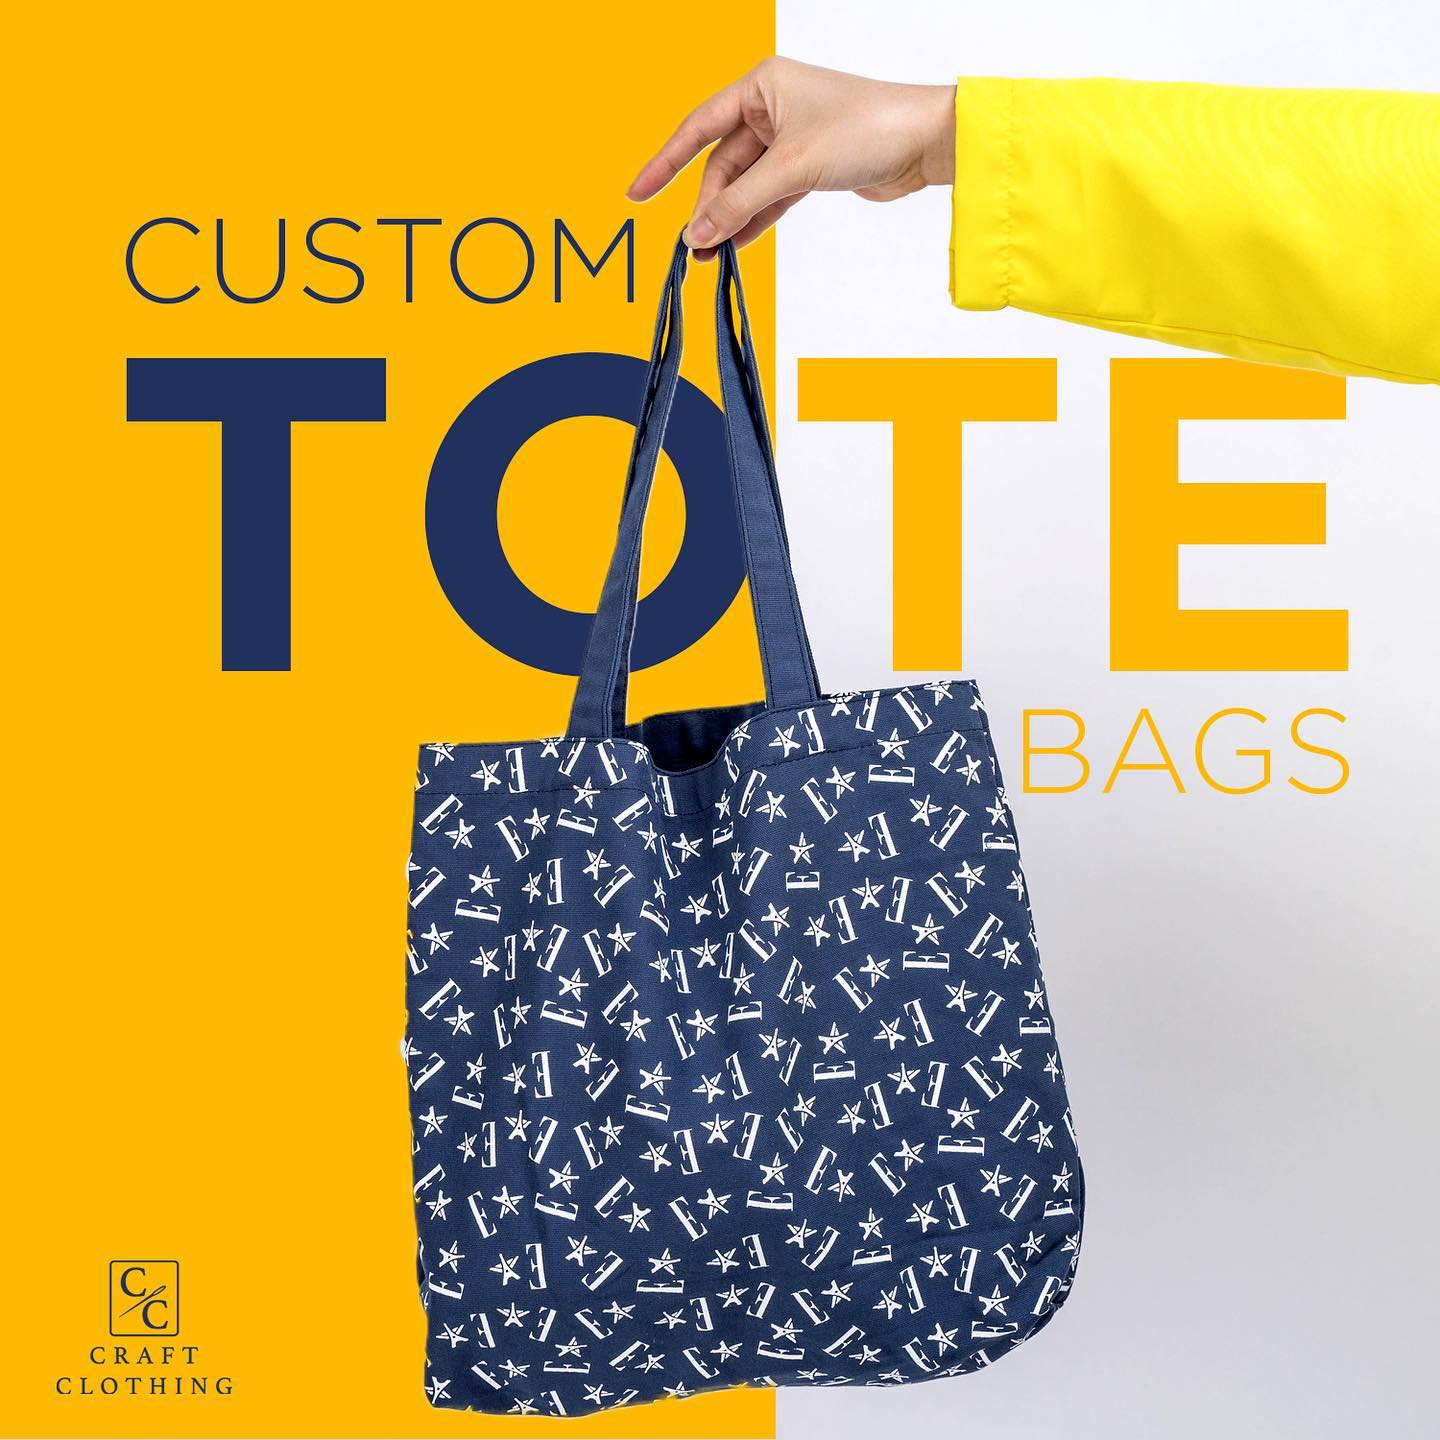 Custom Tote Bags: The perfect grab n’ go bag for your active lifestyle.